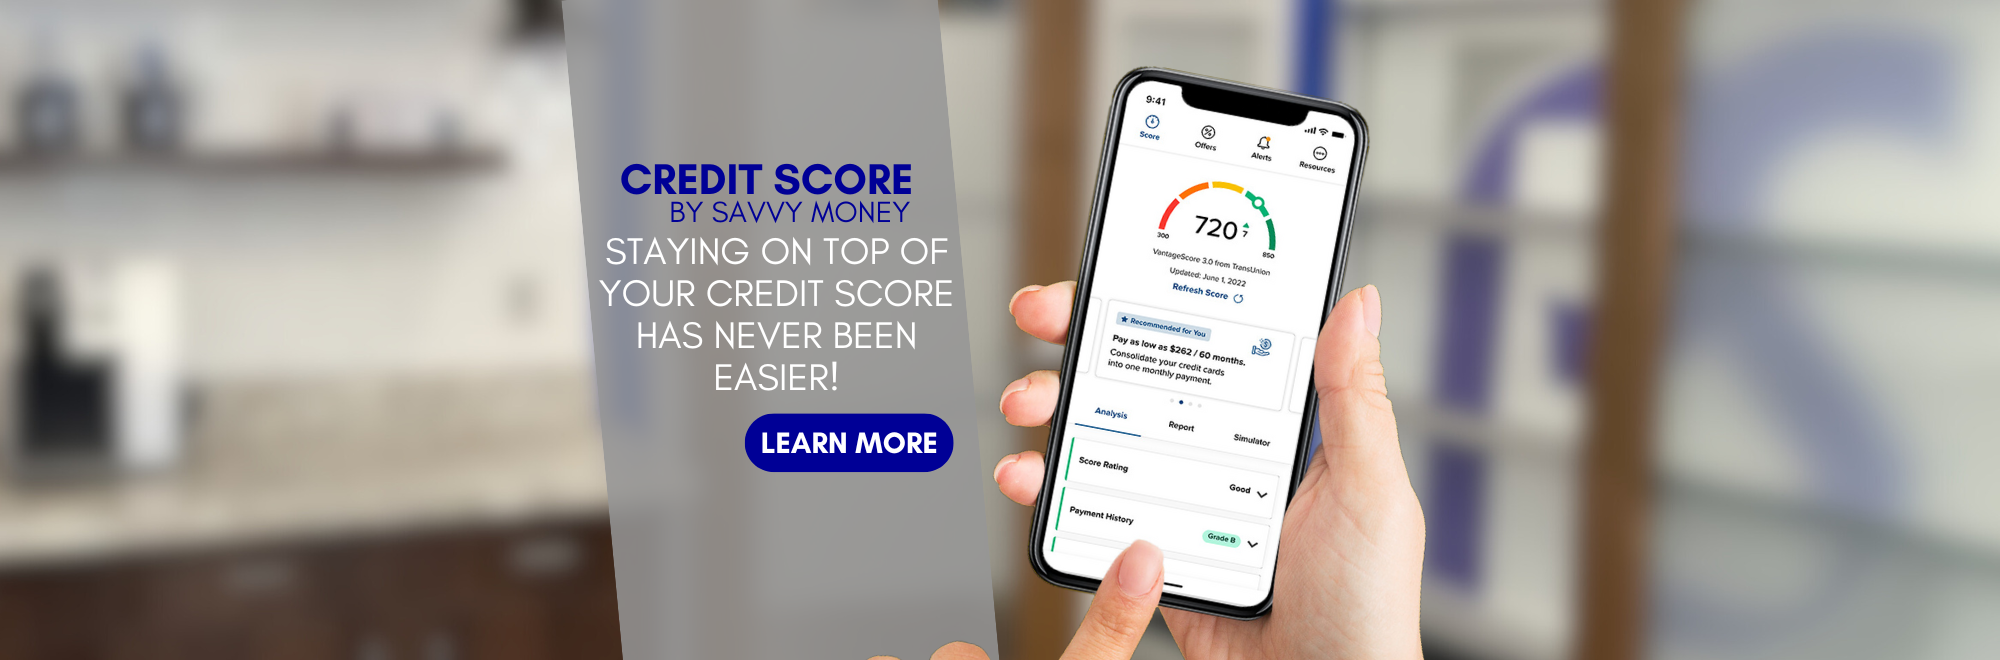 Credit Score by Savvy Money. Staying on top of your credit score has never been easier! Click to learn more.